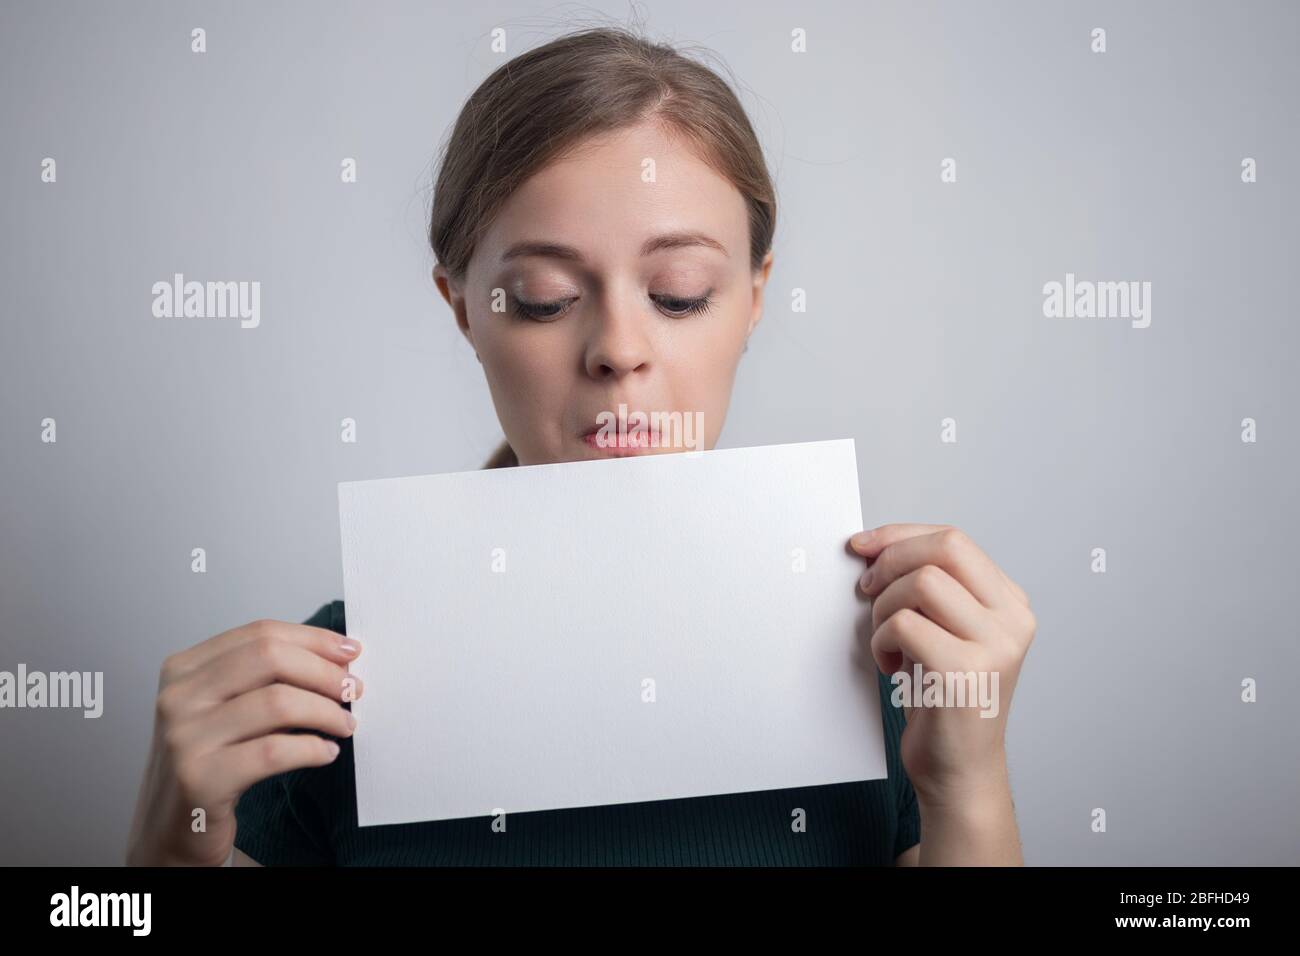 Smiling young Caucasian woman girl holding blank white paper sheet with copy space Stock Photo